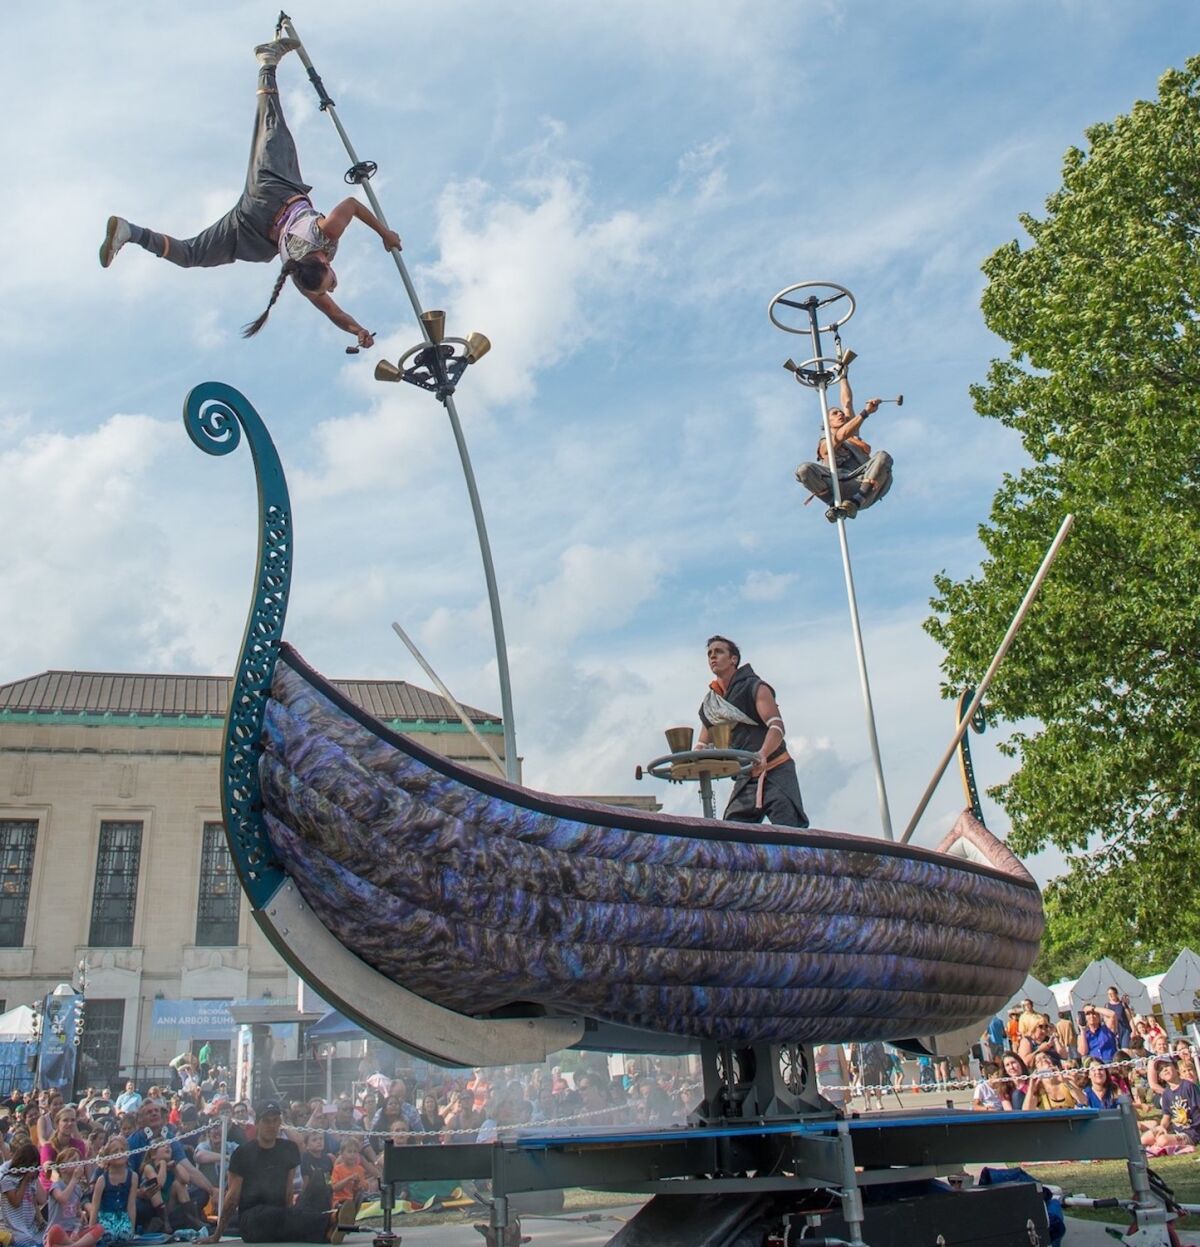 Australia’s Strange Fruit will perform ‘Tall Tales of the High Seas’ on 16-foot sway-poles.